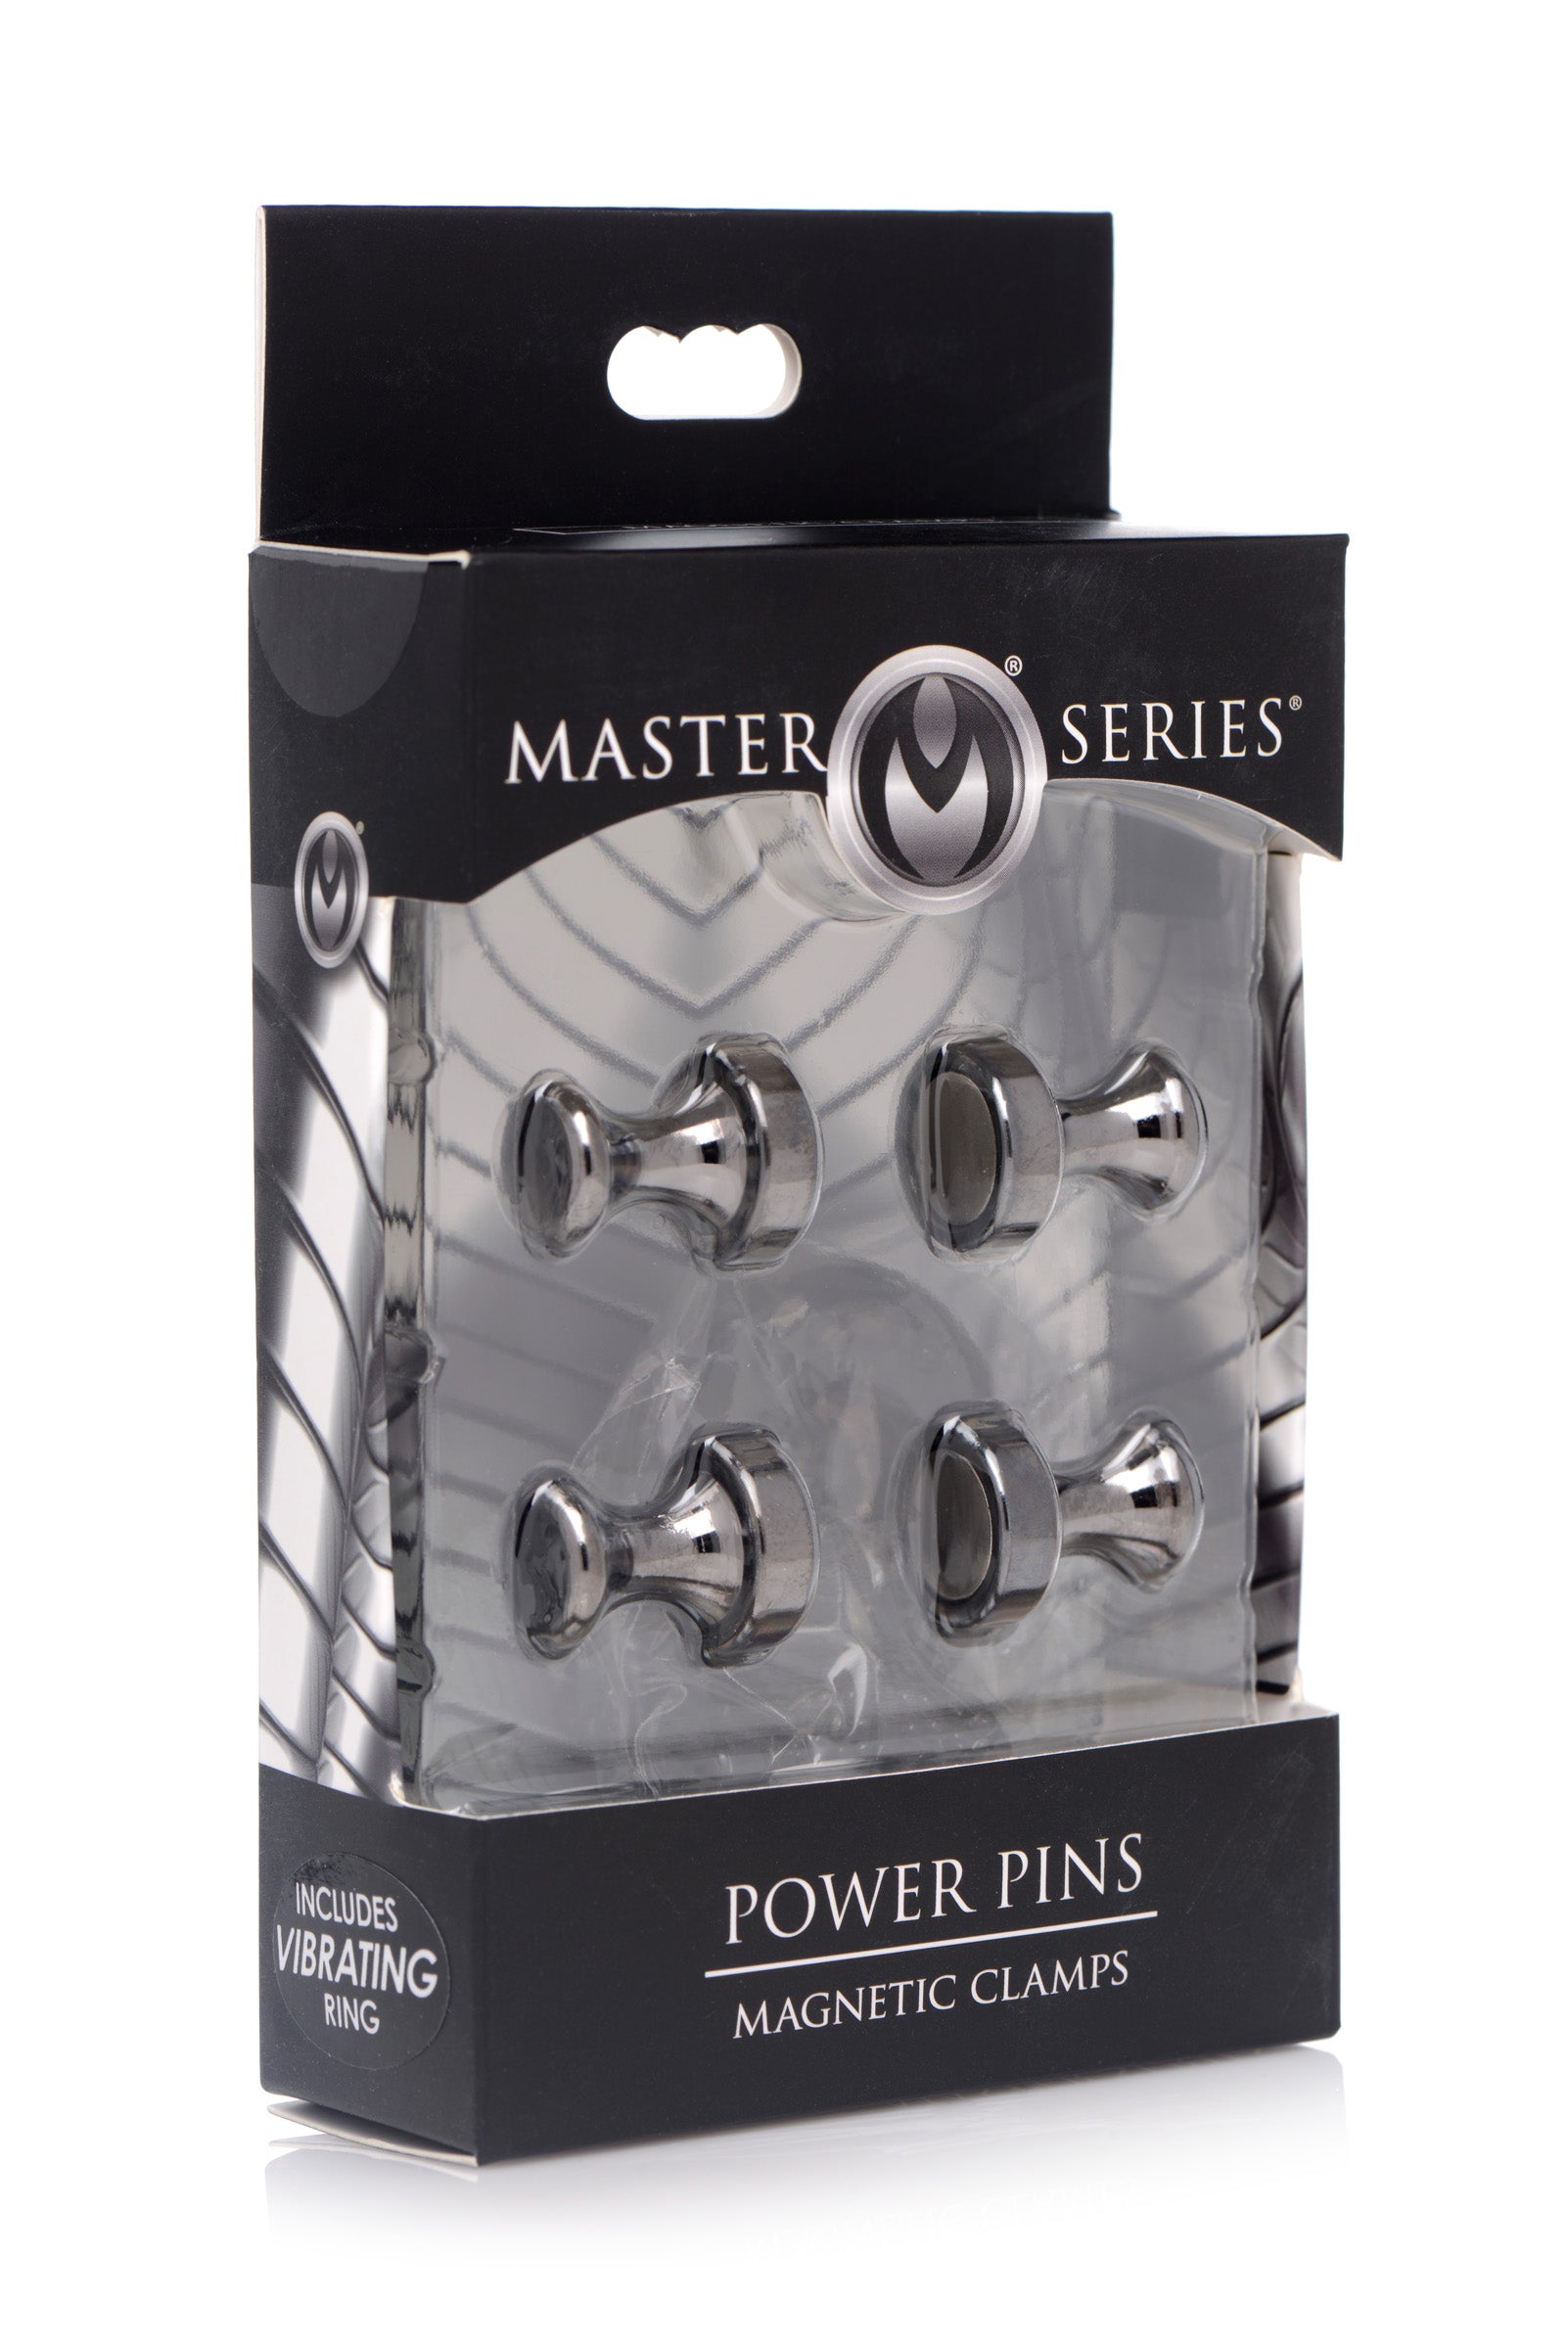 Power Pins Magnetic Clamps - UABDSM